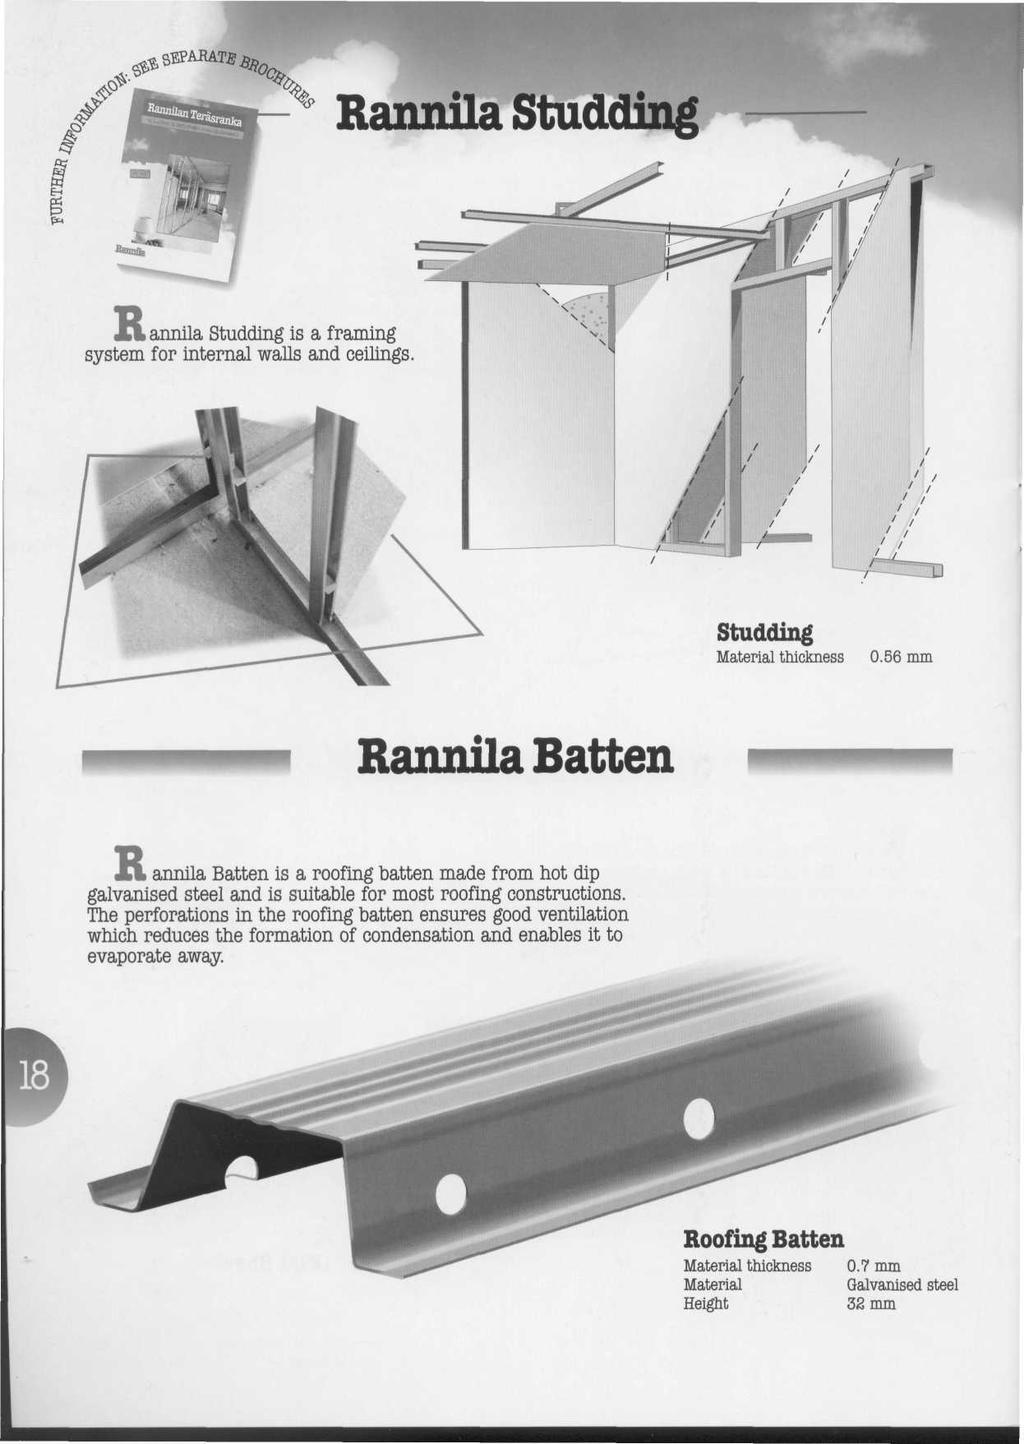 Rannila Studding. annila Studding is a framing system for internal walls and ceilings. Studding Material thickness 0.